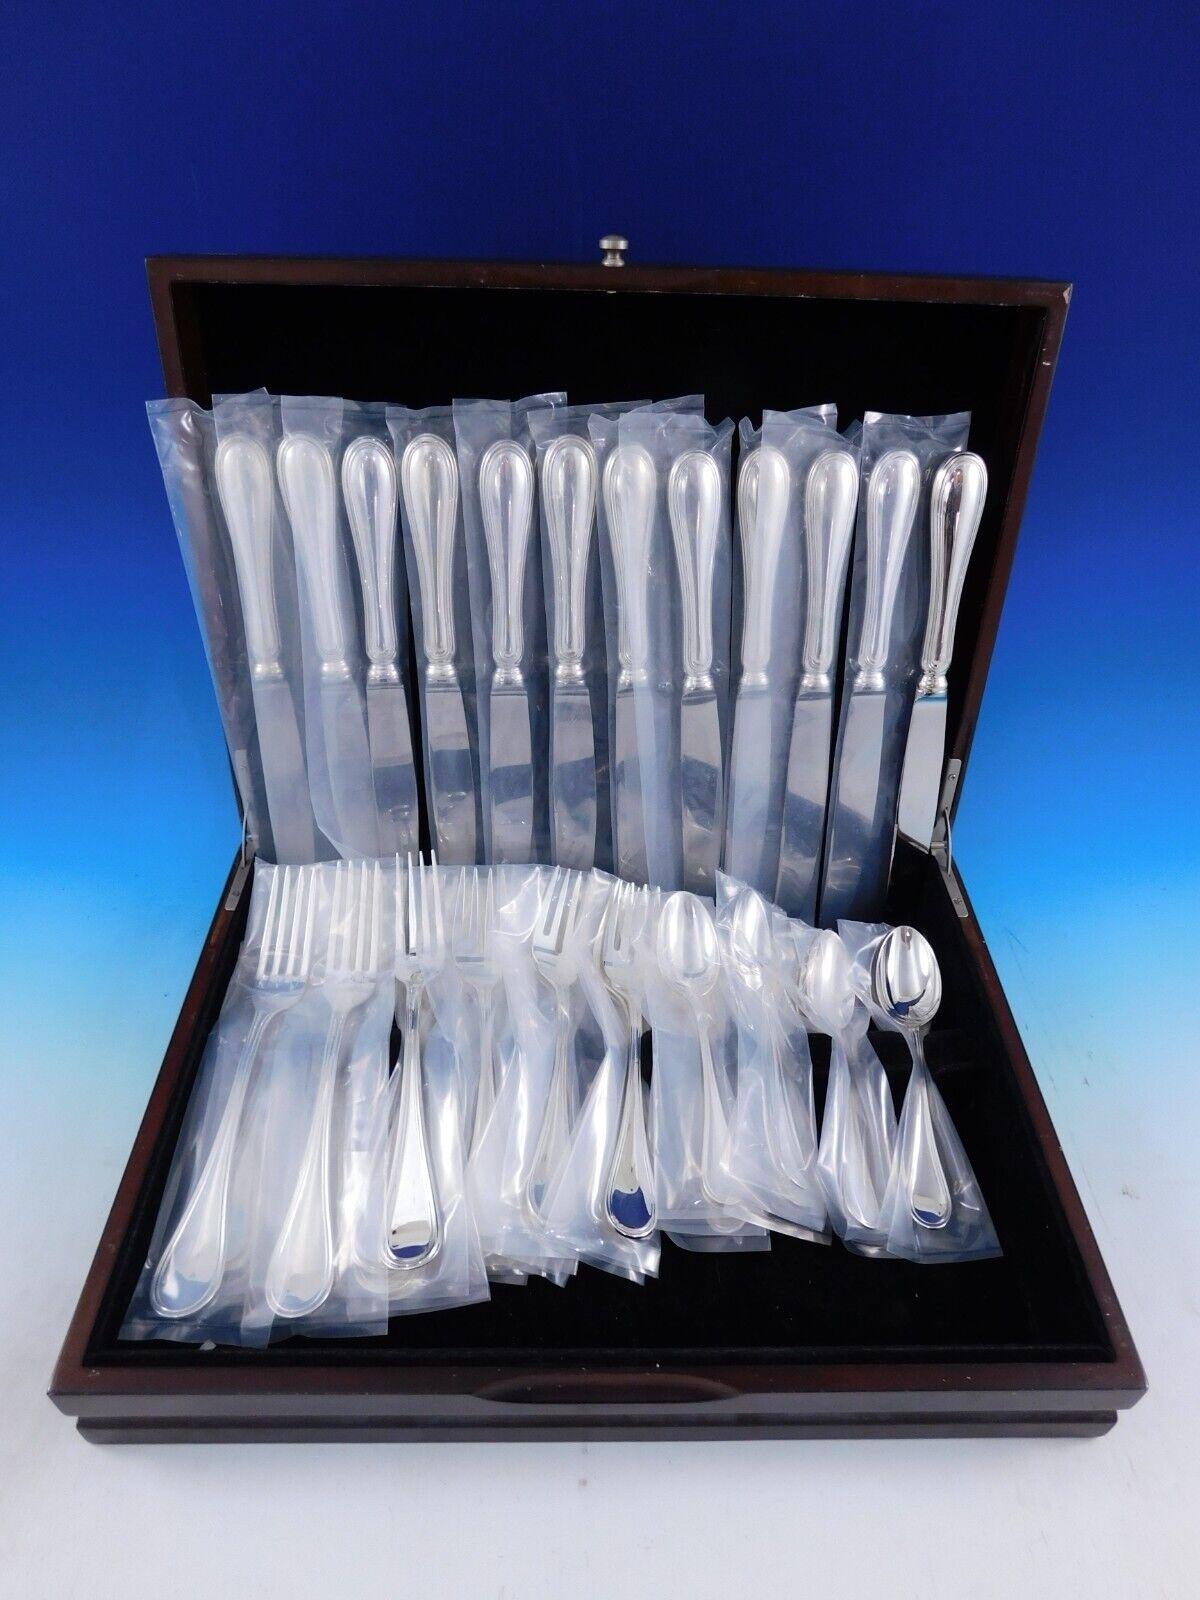 nspired by traditional European continental size sterling silver flatware. Each place setting is made in a true Continental Size, and in a heavier-than-standard weight. 


 Giorgio Italy Sterling Silver & 800 silver Flatware set, 48 pieces. This set